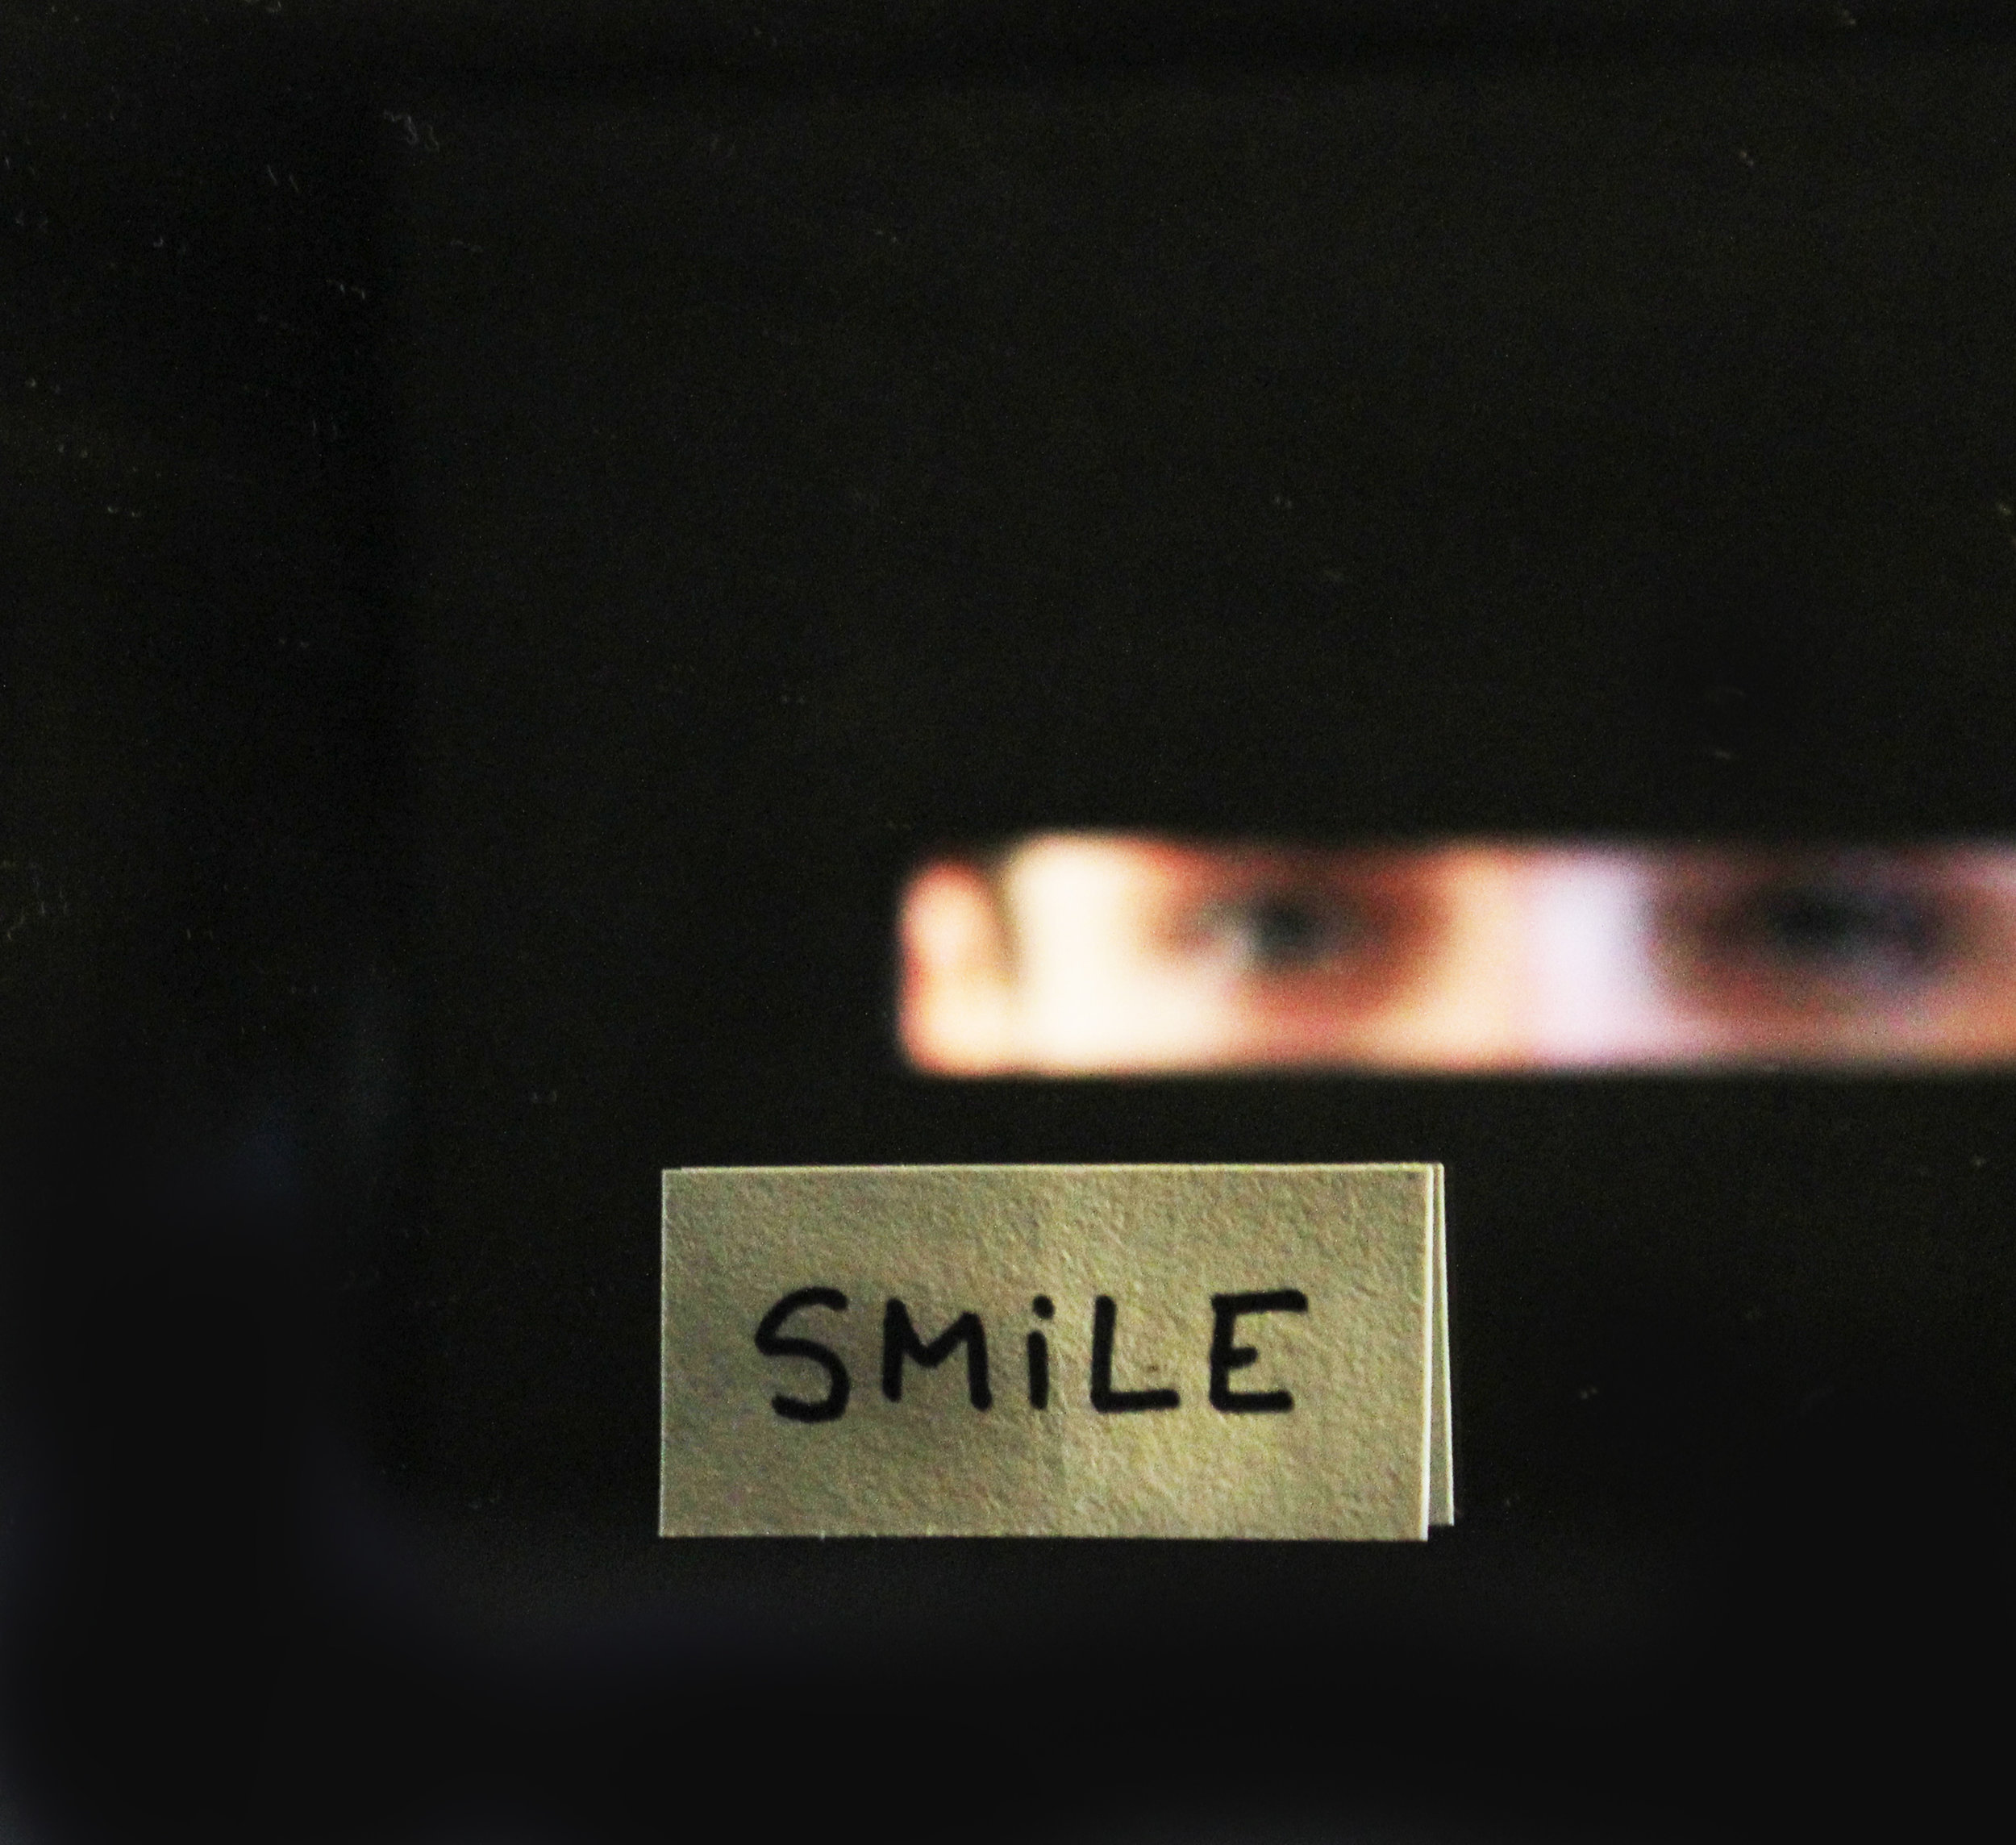  Box of smiling eyes, 2014  Closed painted wooden box with a small peephole to look inside the box and see your own eyes reflecting in a mirror and the word SMILE. 